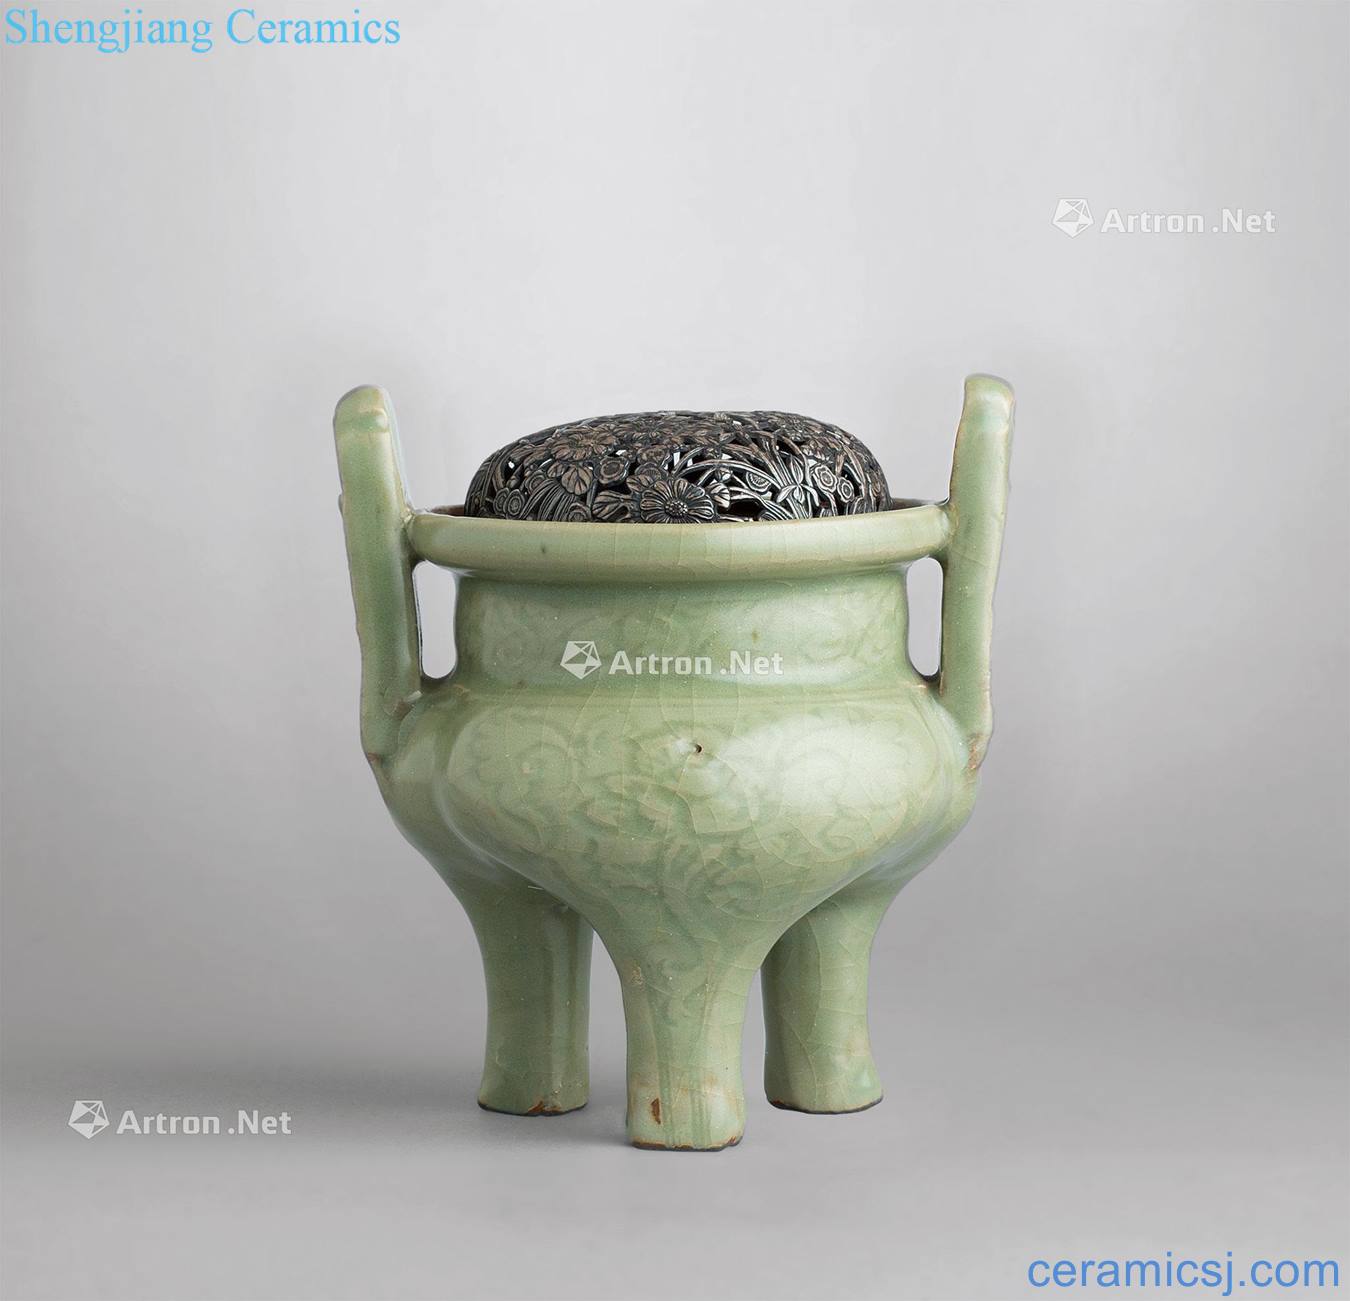 The yuan dynasty Celadon ears furnace with three legs